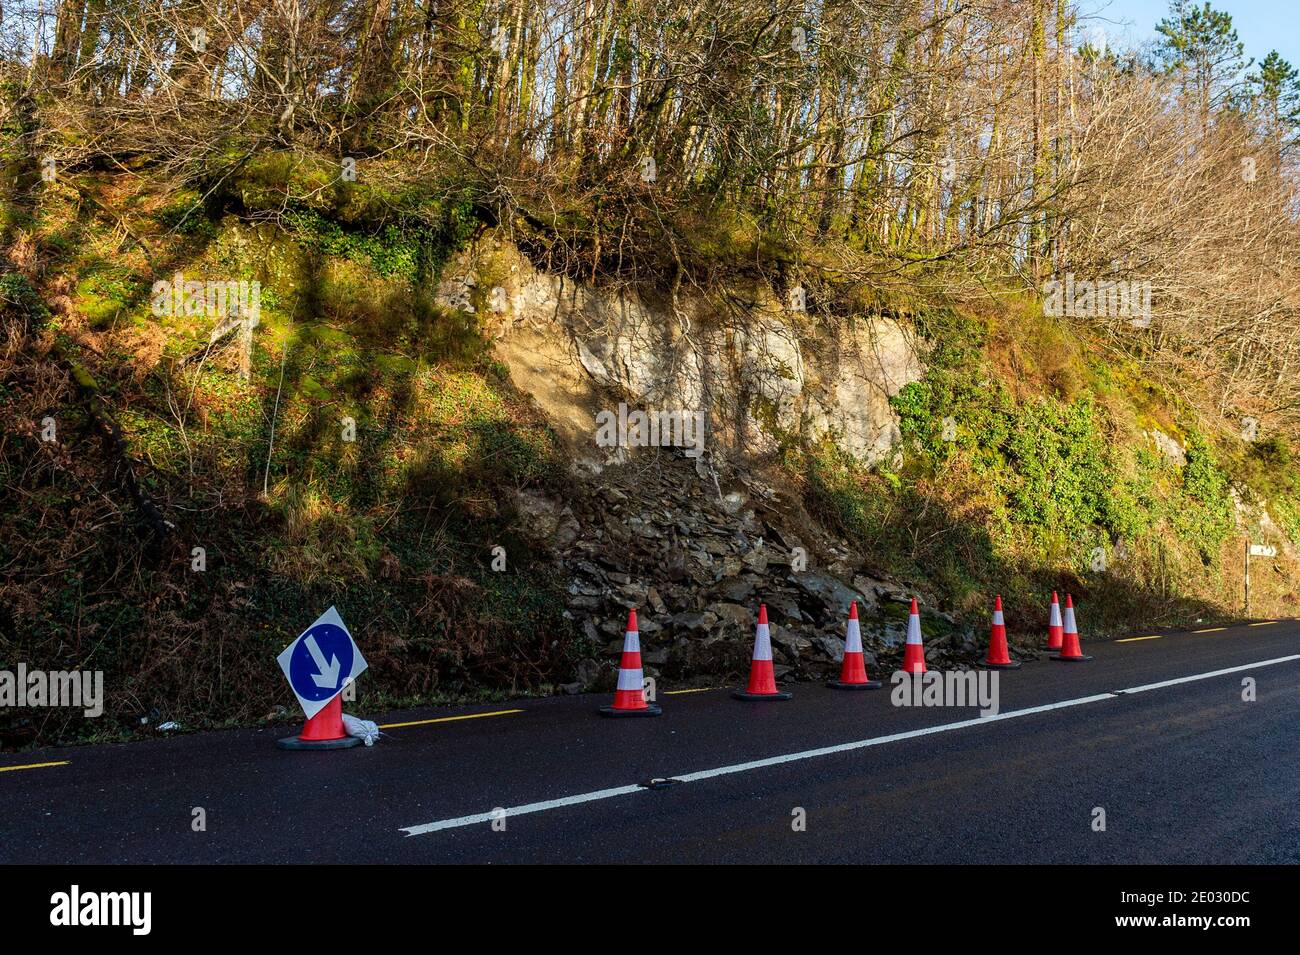 Gloundha, West Cork, Ireland. 29th Dec, 2020. Due to recent torrential rain, a small landslide occurred overnight on the R586 at Gloundha, between Drimoleague and Dunmanway. The county council have placed traffic cones around the hazard. Credit: AG News/Alamy Live News Stock Photo